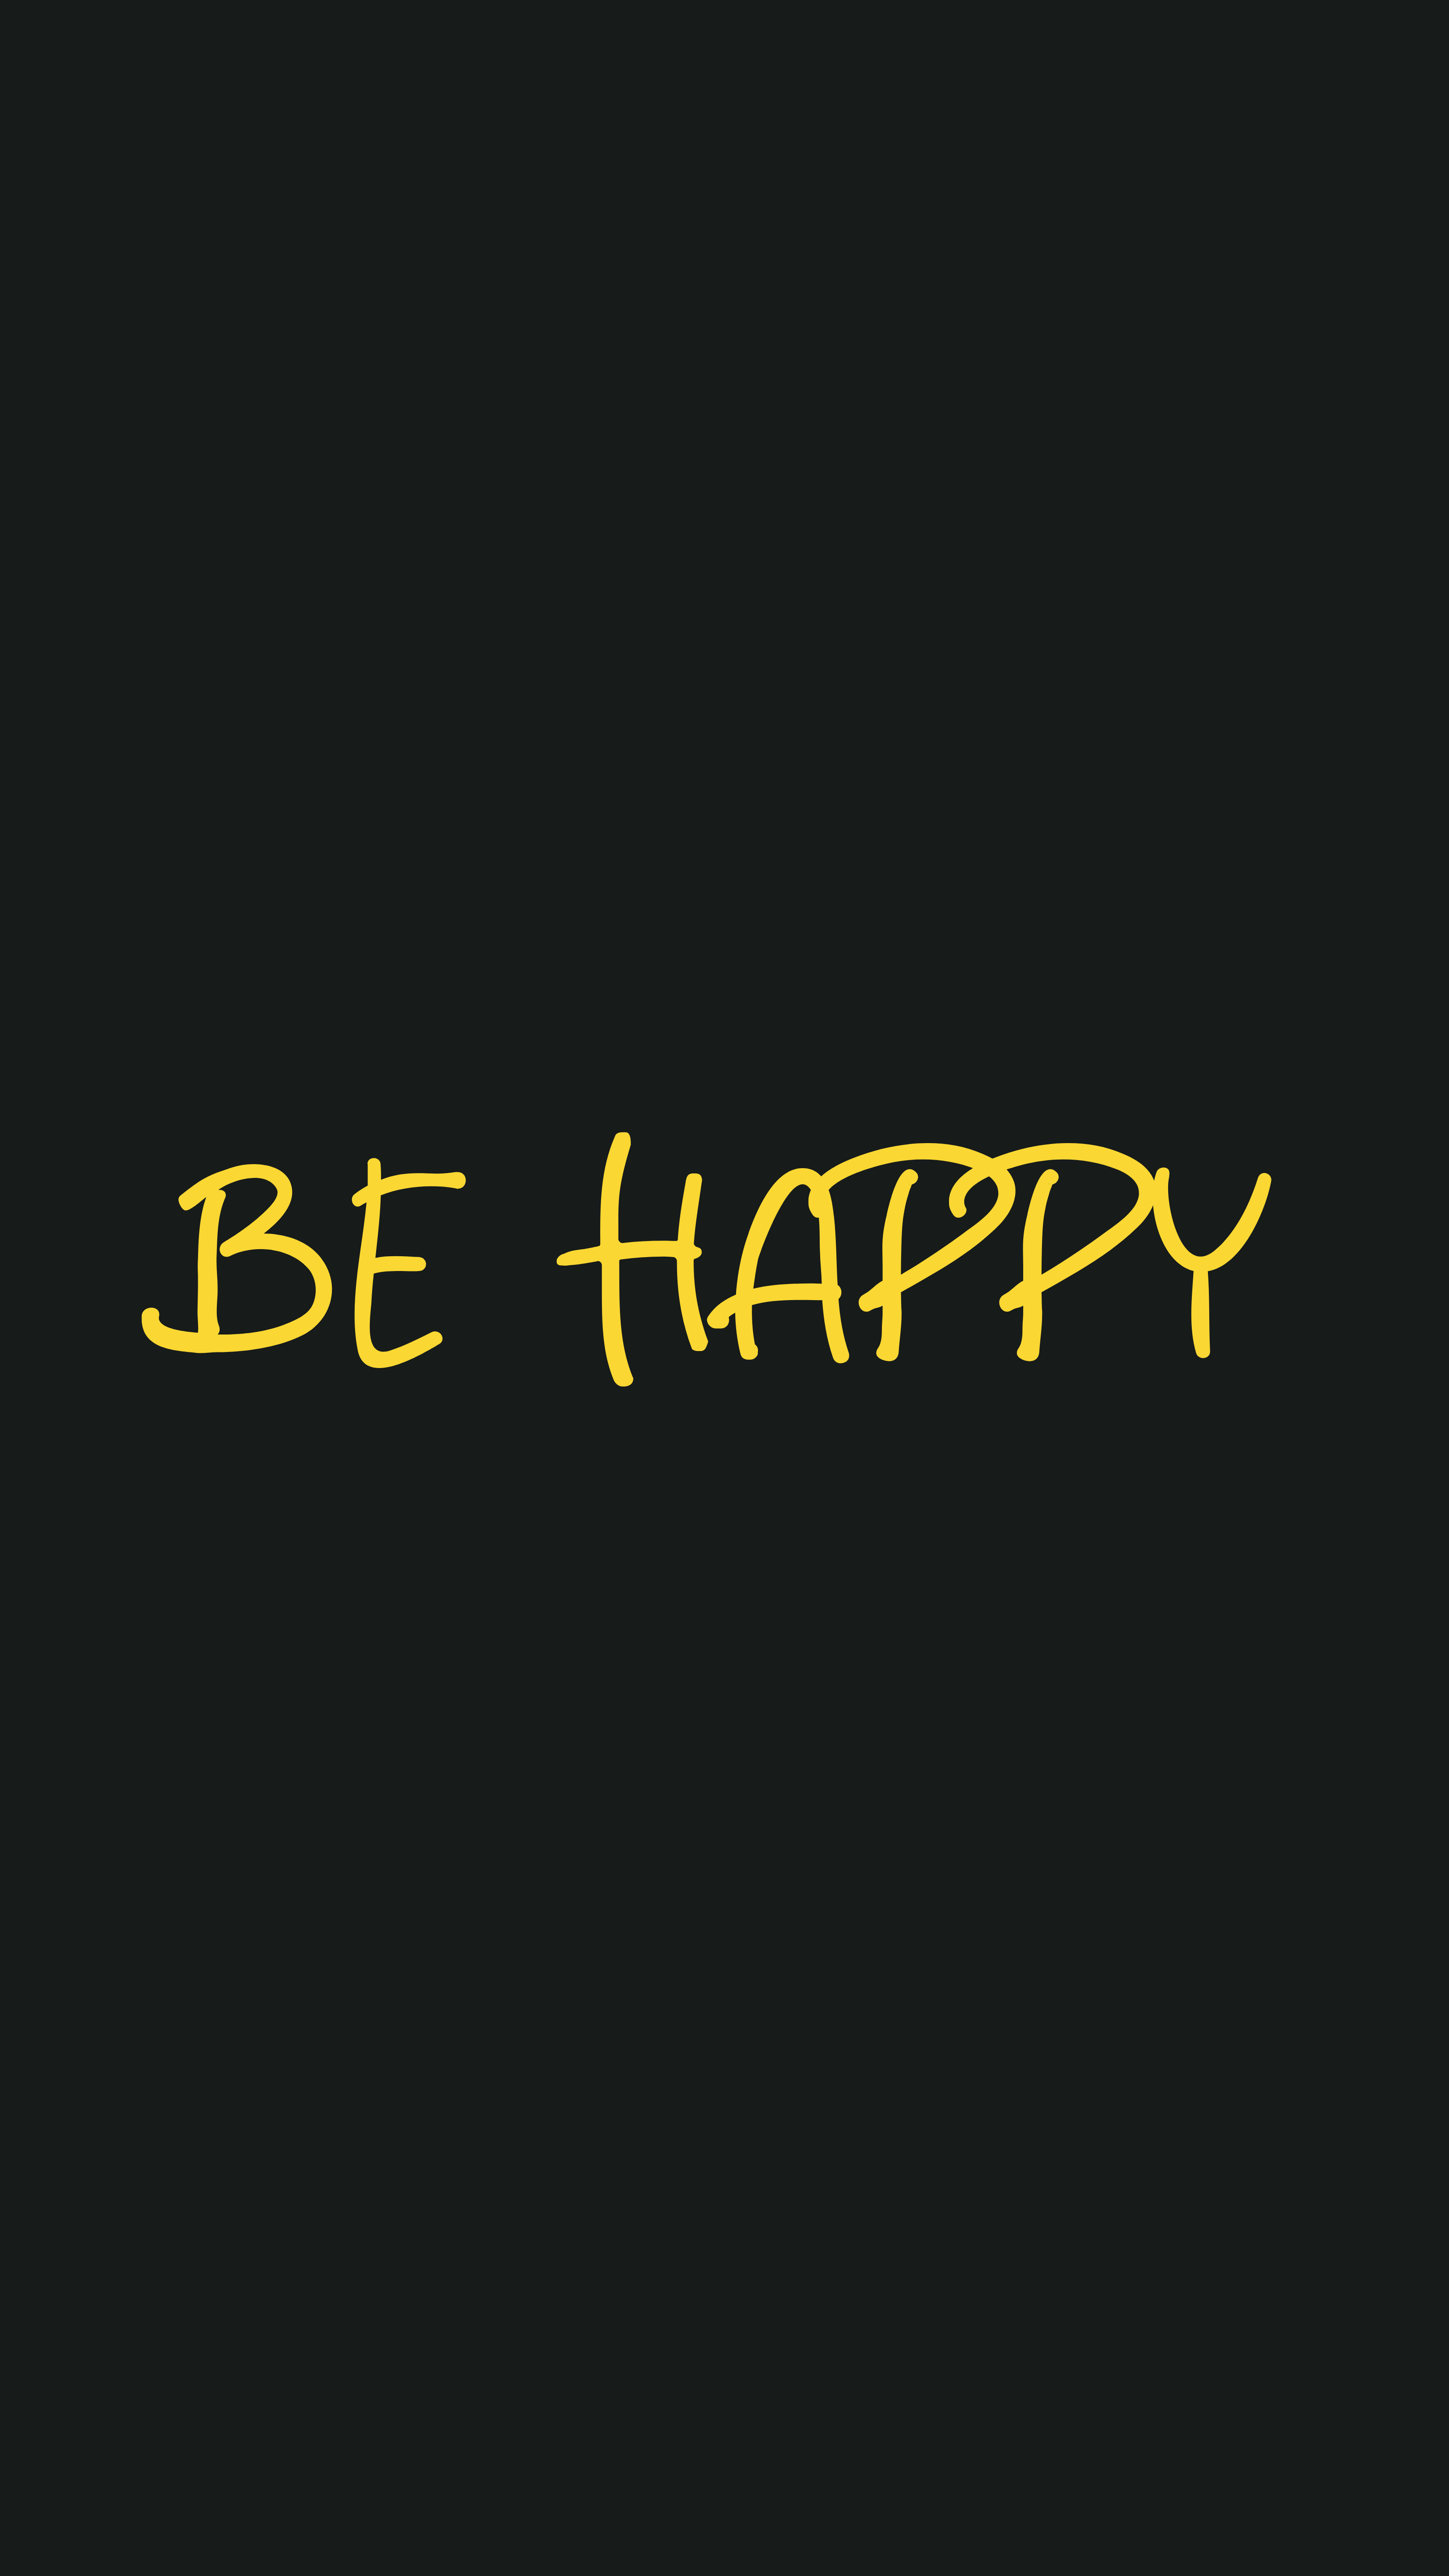 148143 free wallpaper 320x480 for phone, download images mood, motivation, happiness, words 320x480 for mobile